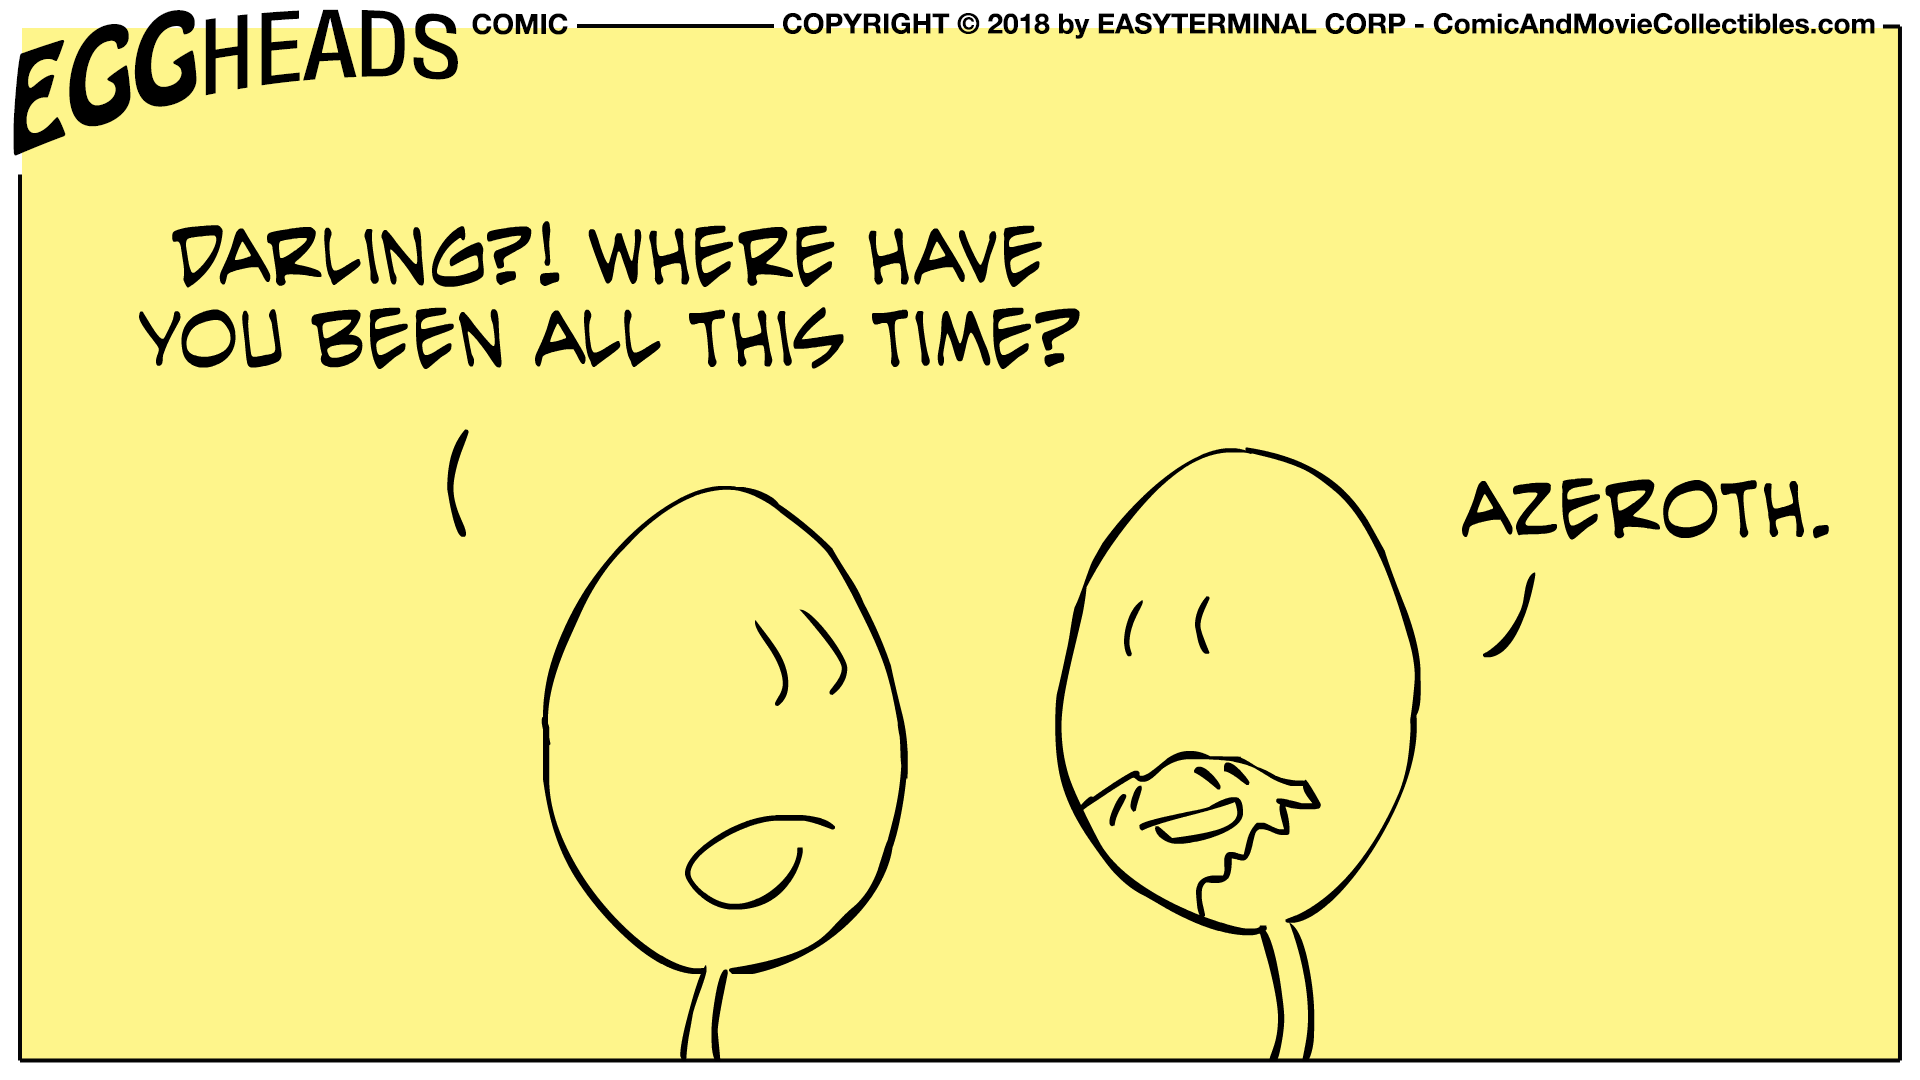 Webcomic Eggheads Comic Strip 019 Where Have You Been